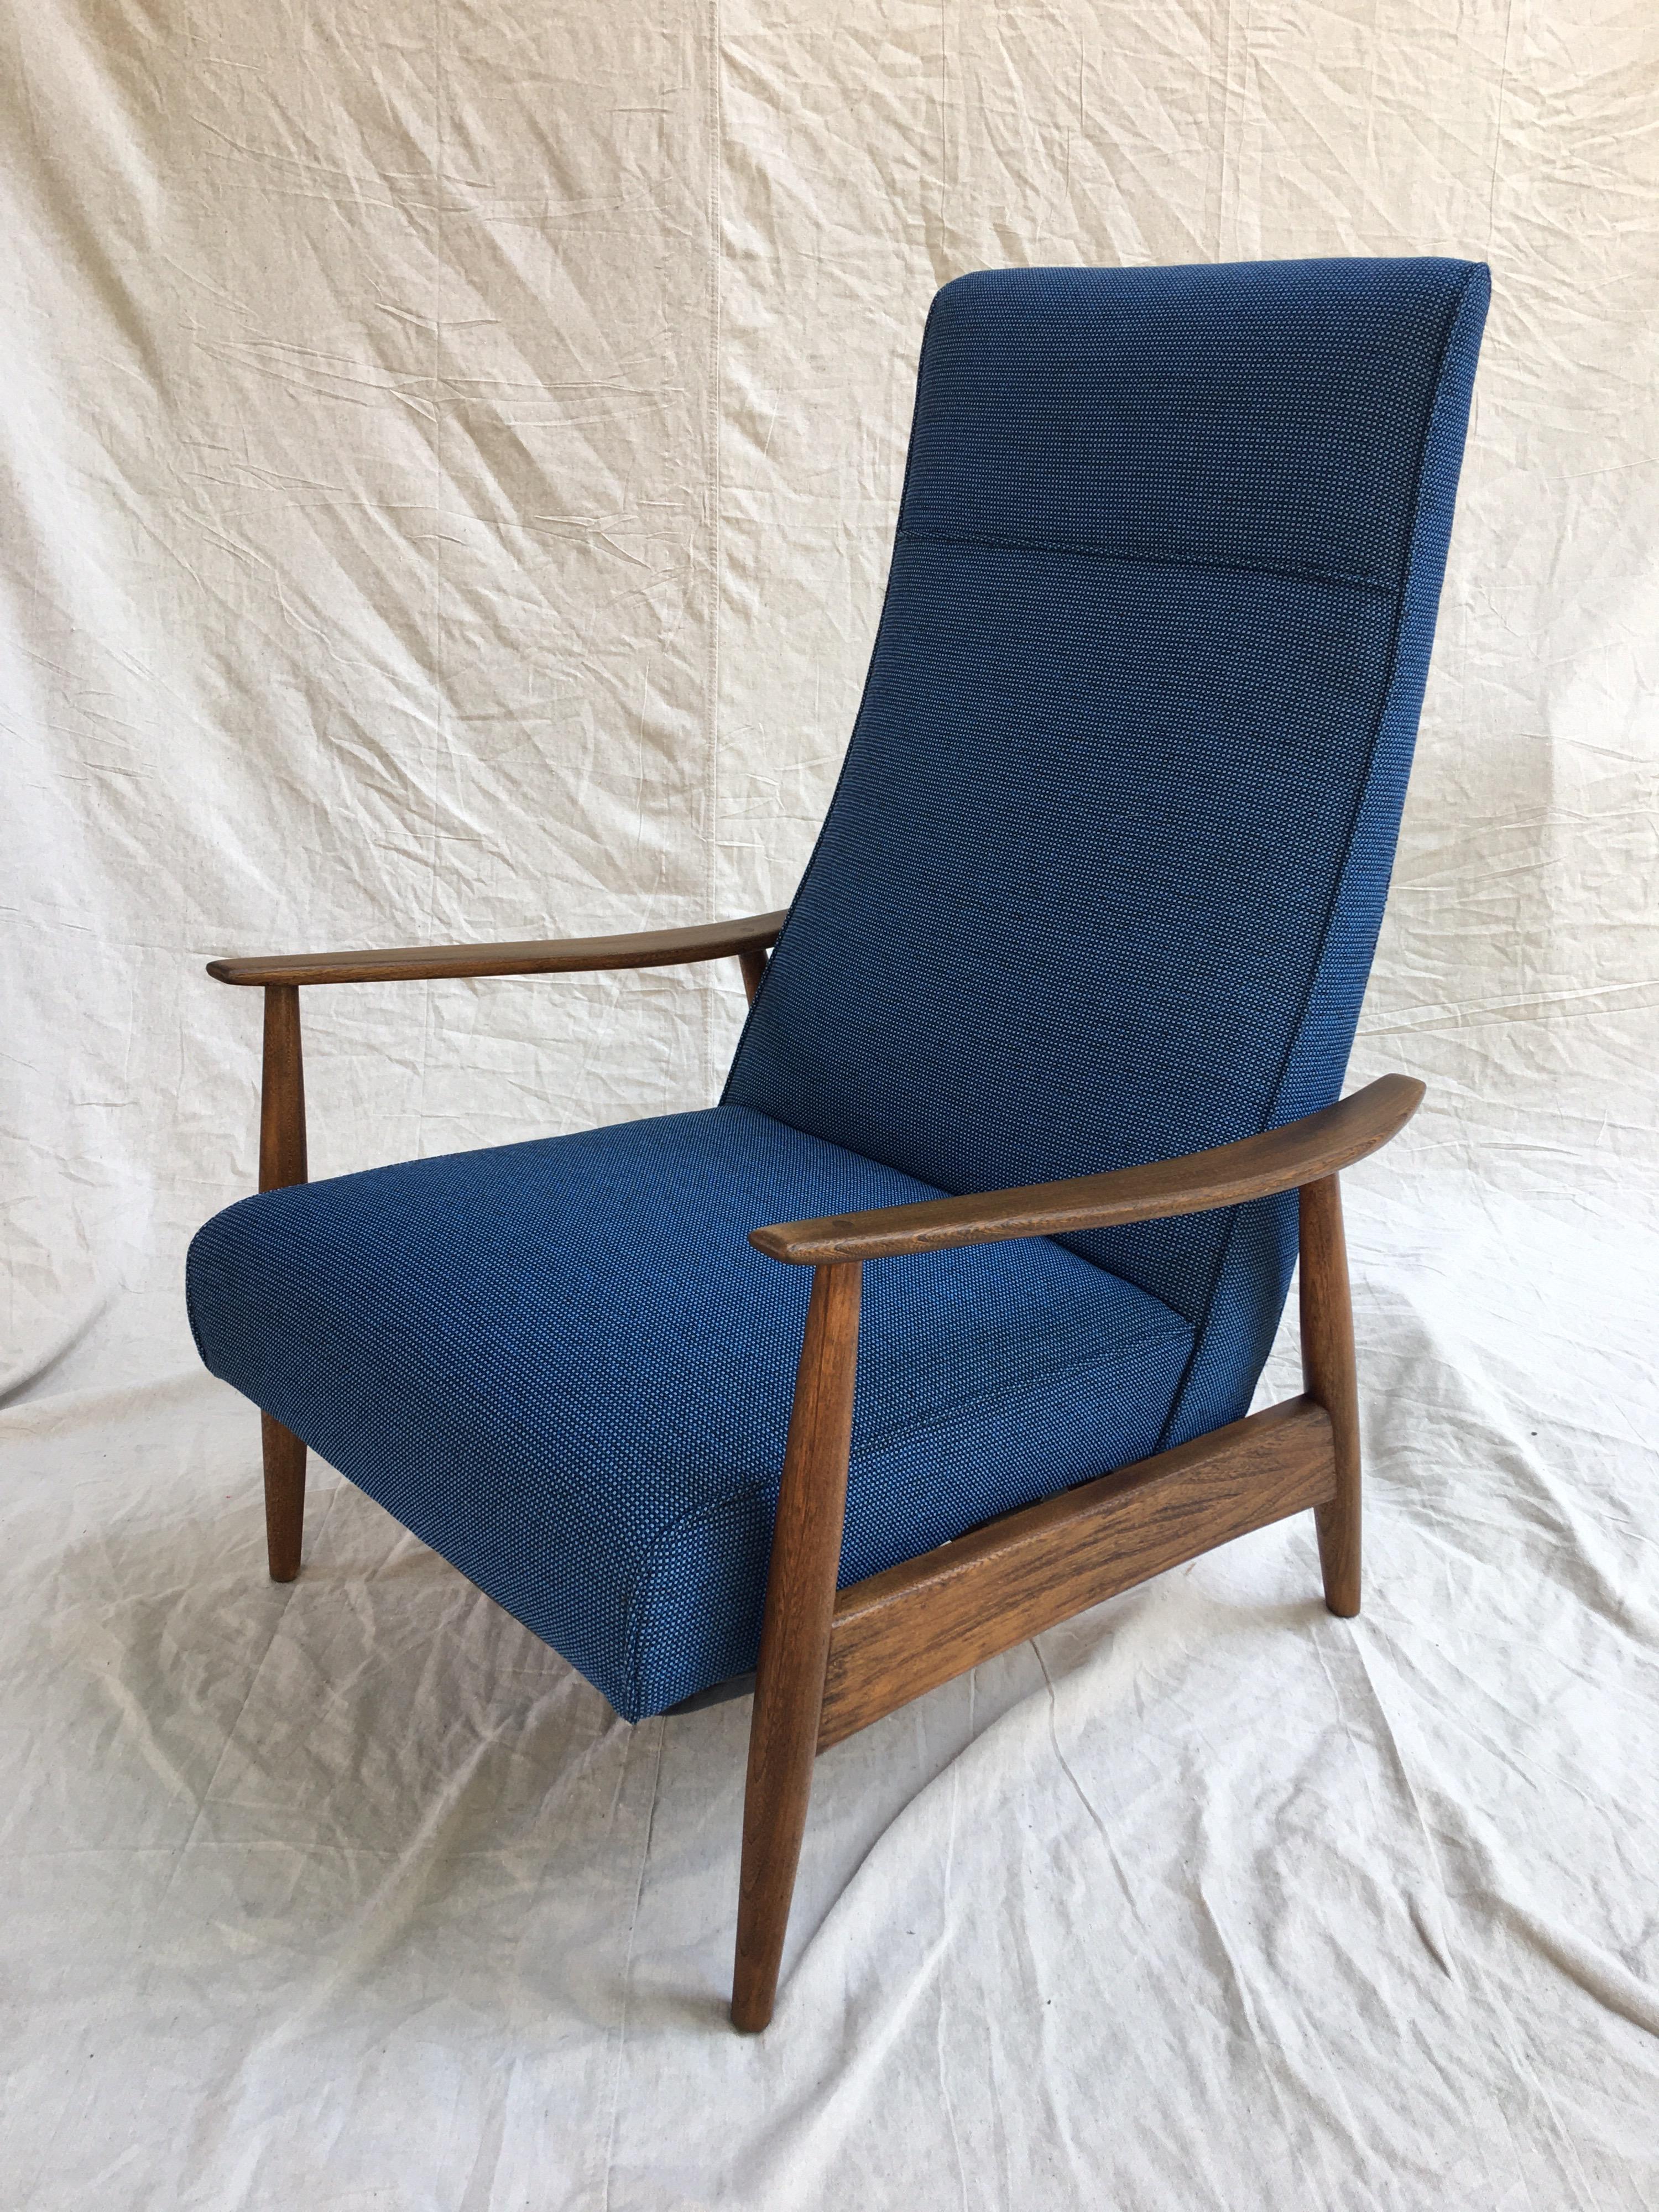 1960s recliner in the style of Milo Baughman. footrest kicks out when you lean back! Black leather and a really nice nubby blue fabric. Walnut Frame all refinished and ready to go! When fully extended the chair is 52